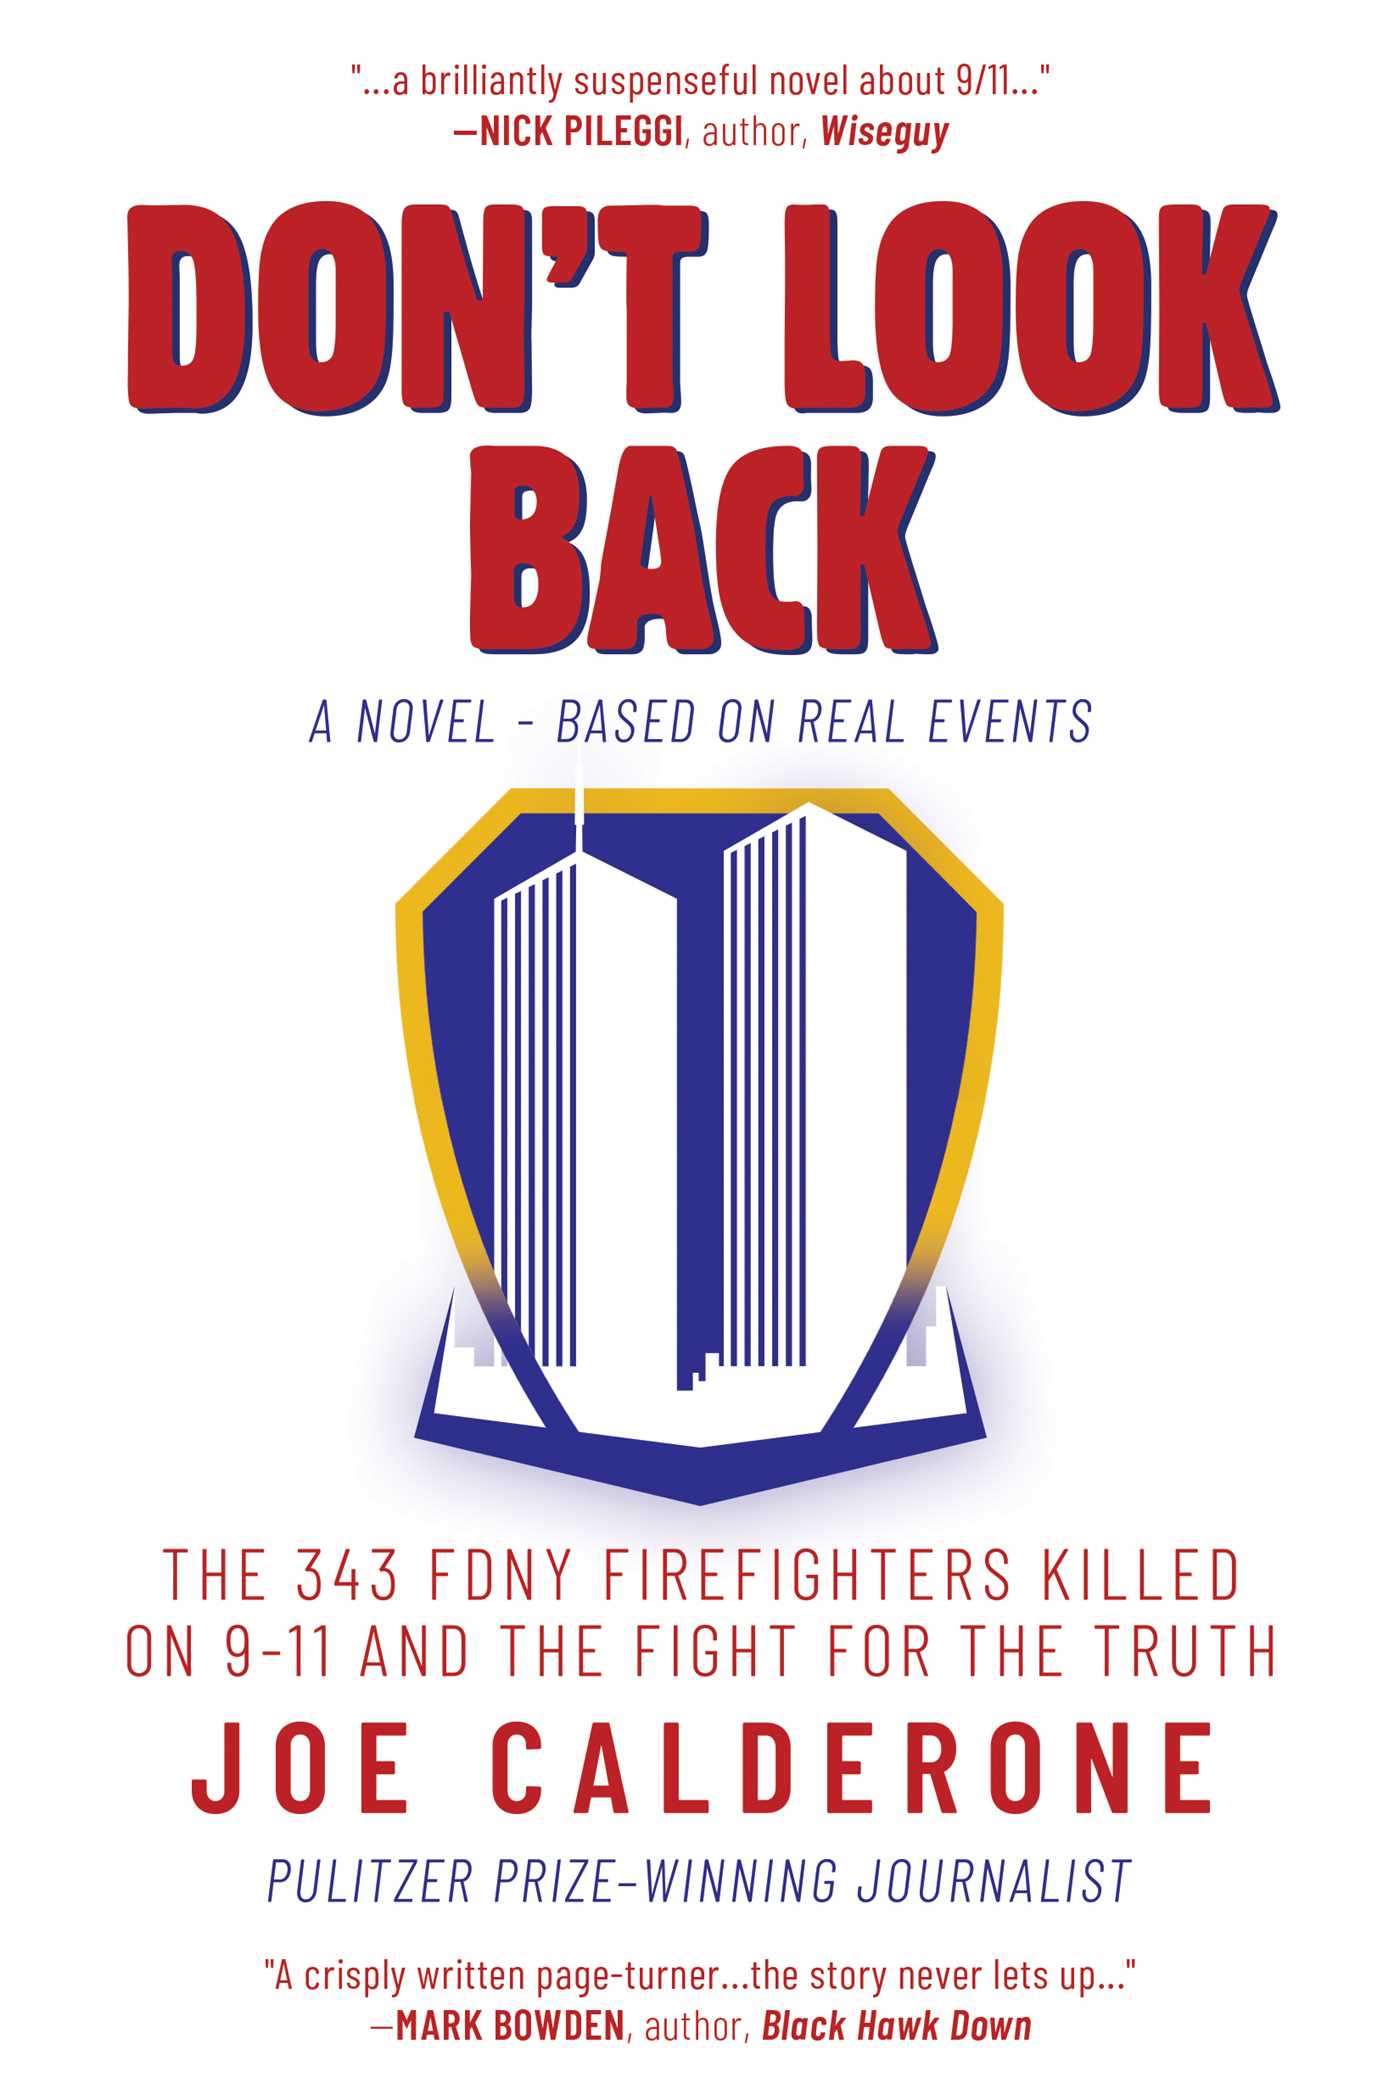 "Don't Look Back: The 343 FDNY Firefighters Killed on 9-11 and the Fight for the Truth" by Joe Calderone